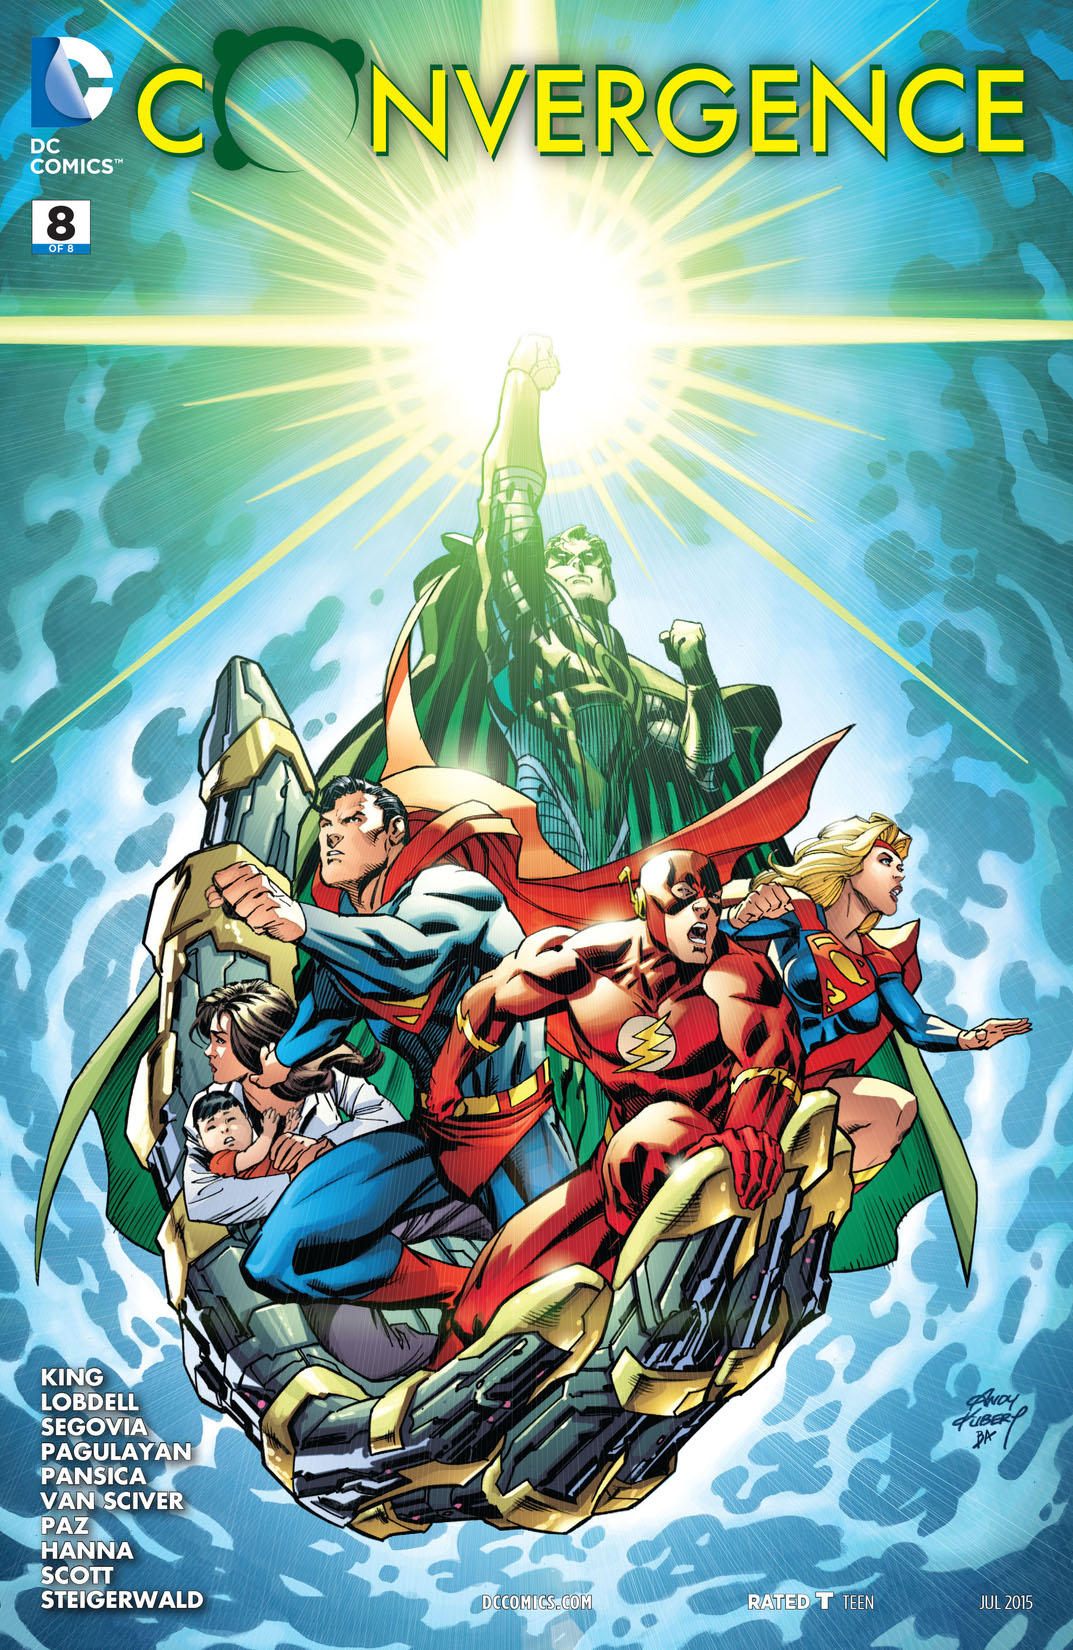 Convergence #8 preview images